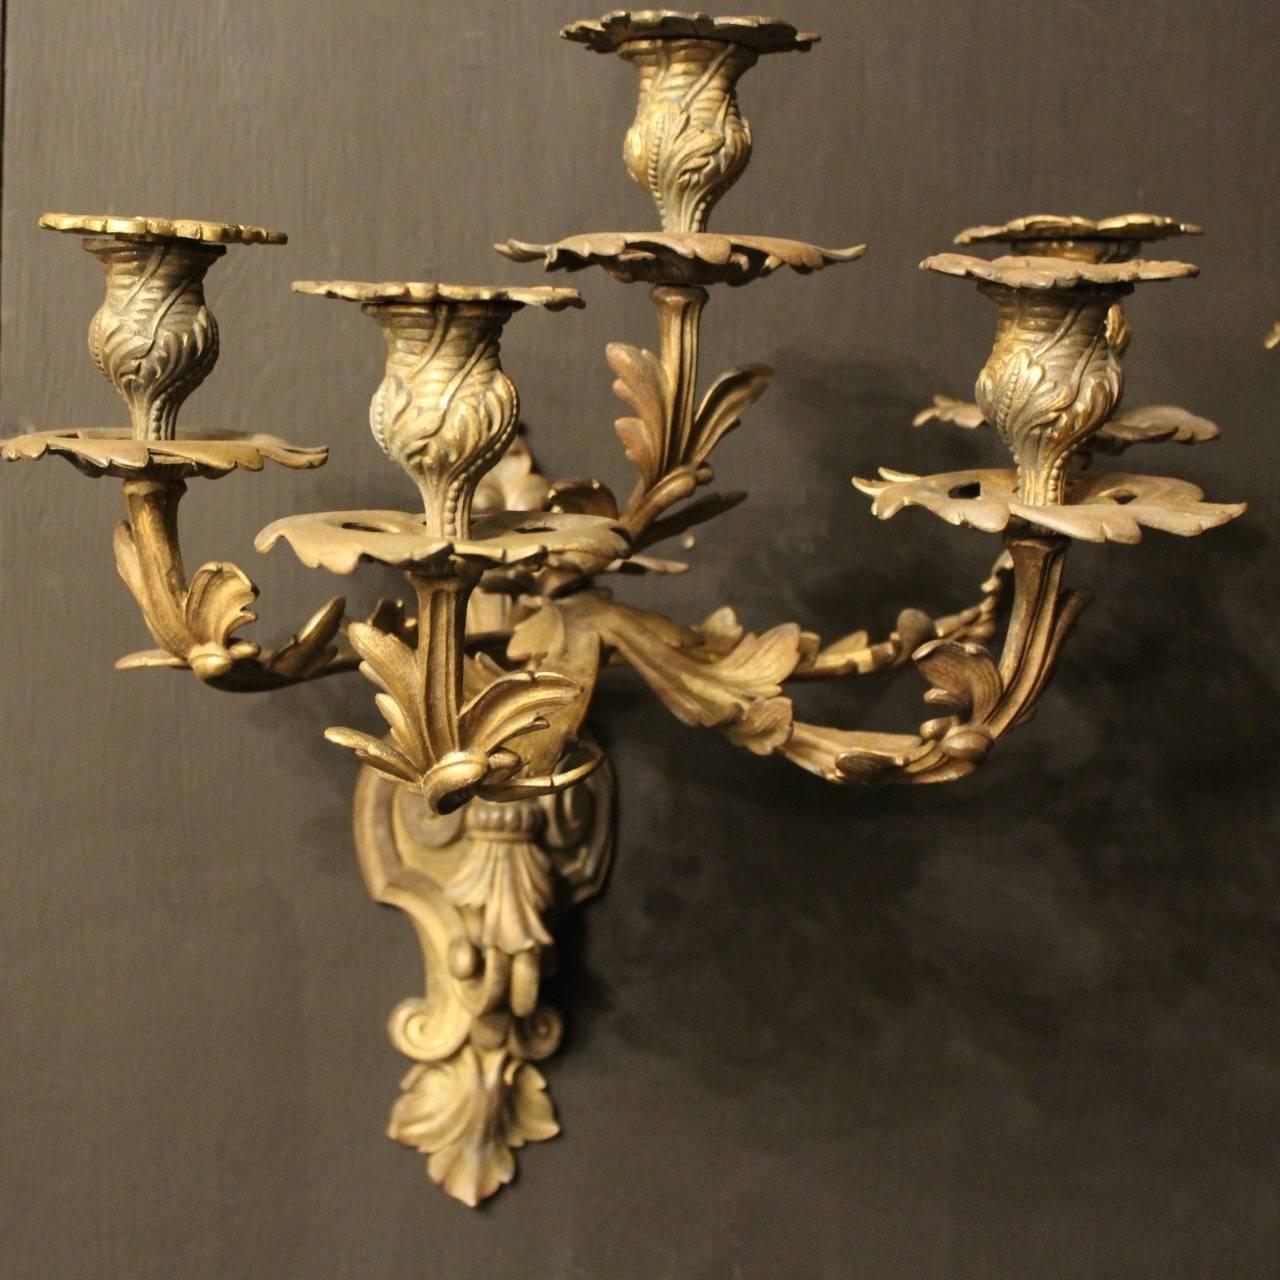 A pair of large French bronze five-arm antique candle wall sconces, the acanthus leaf scrolling arms with pierced leaf bobeche drip pans and bulbous leaf candle sconces, issuing from a decoratively cast backplate, original patination and well cast.